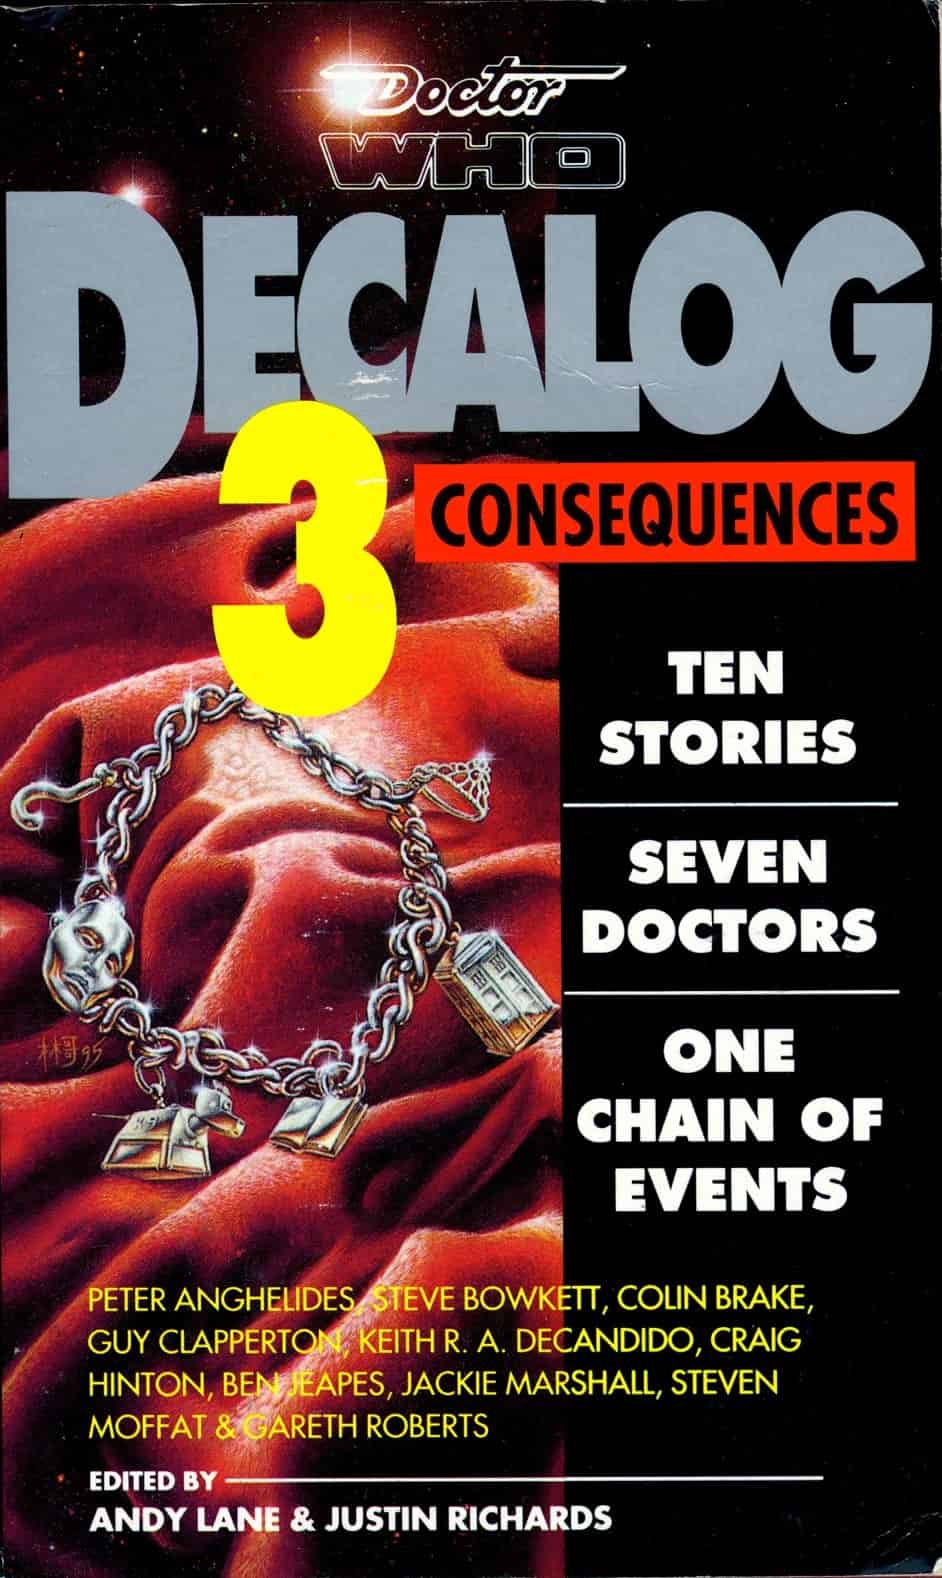 Decalog 3: Consequences cover by Colin Howard